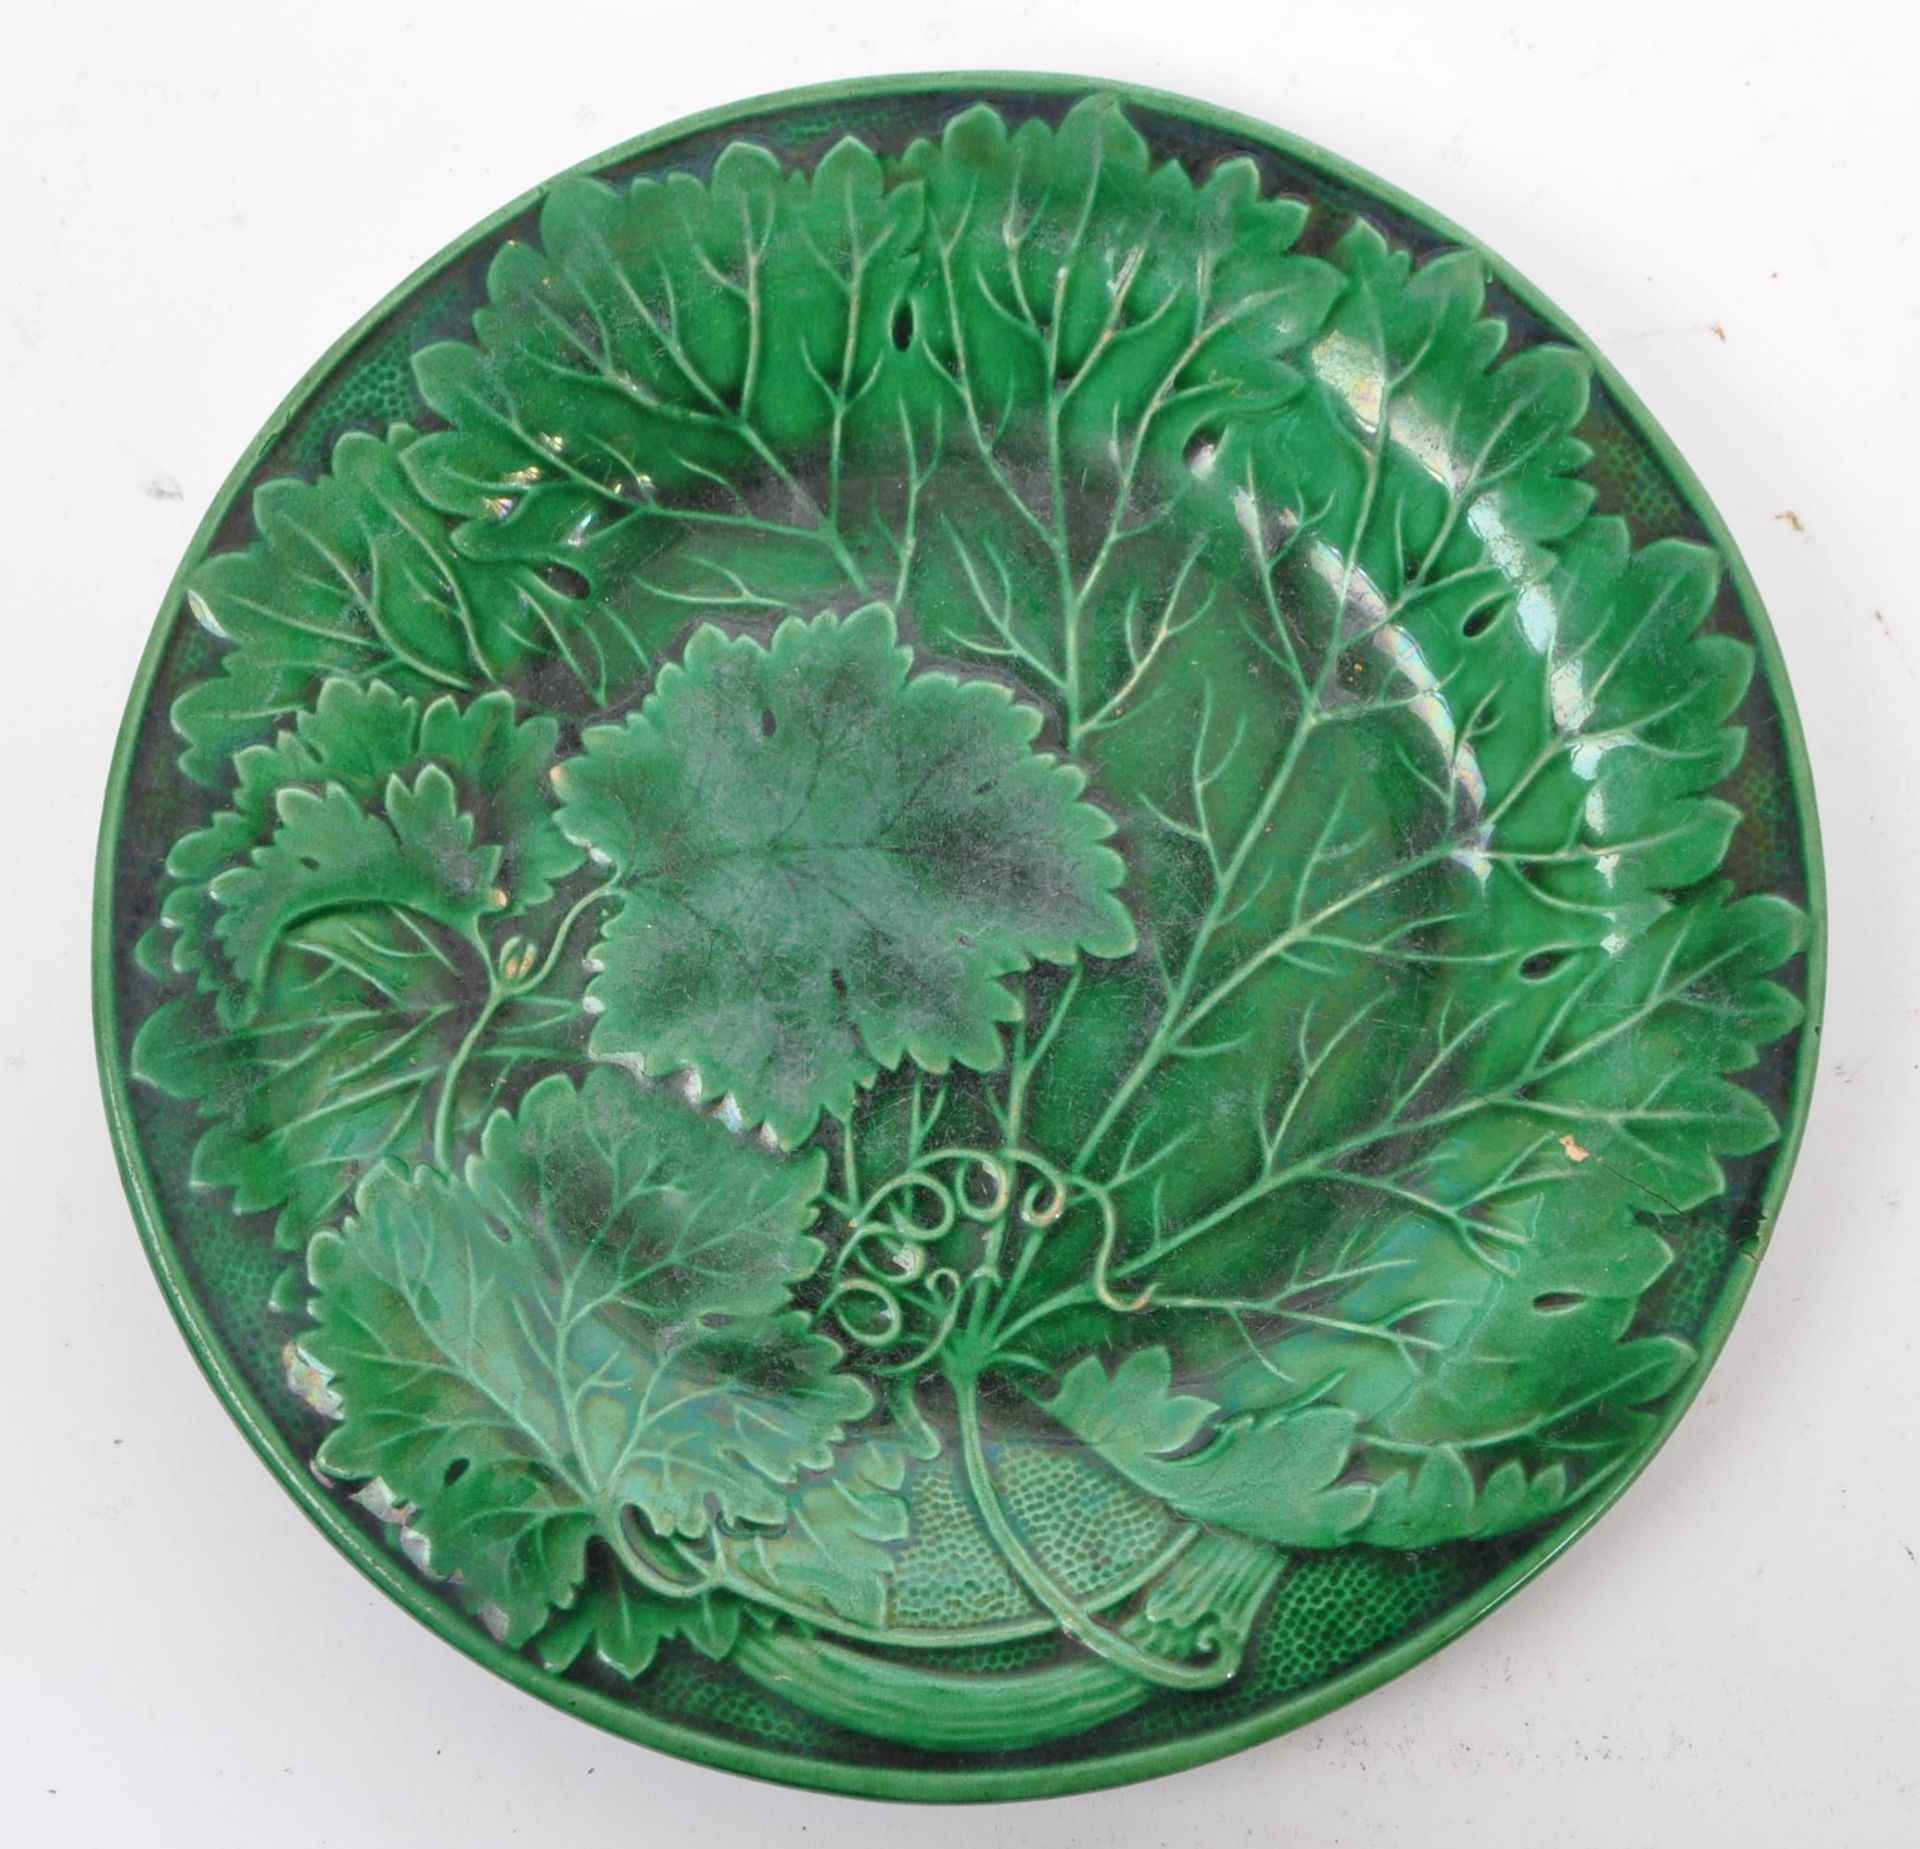 COLLECTION OF 19TH CENTURY WEDGWOOD MAJOLICA PLATES - Image 3 of 6